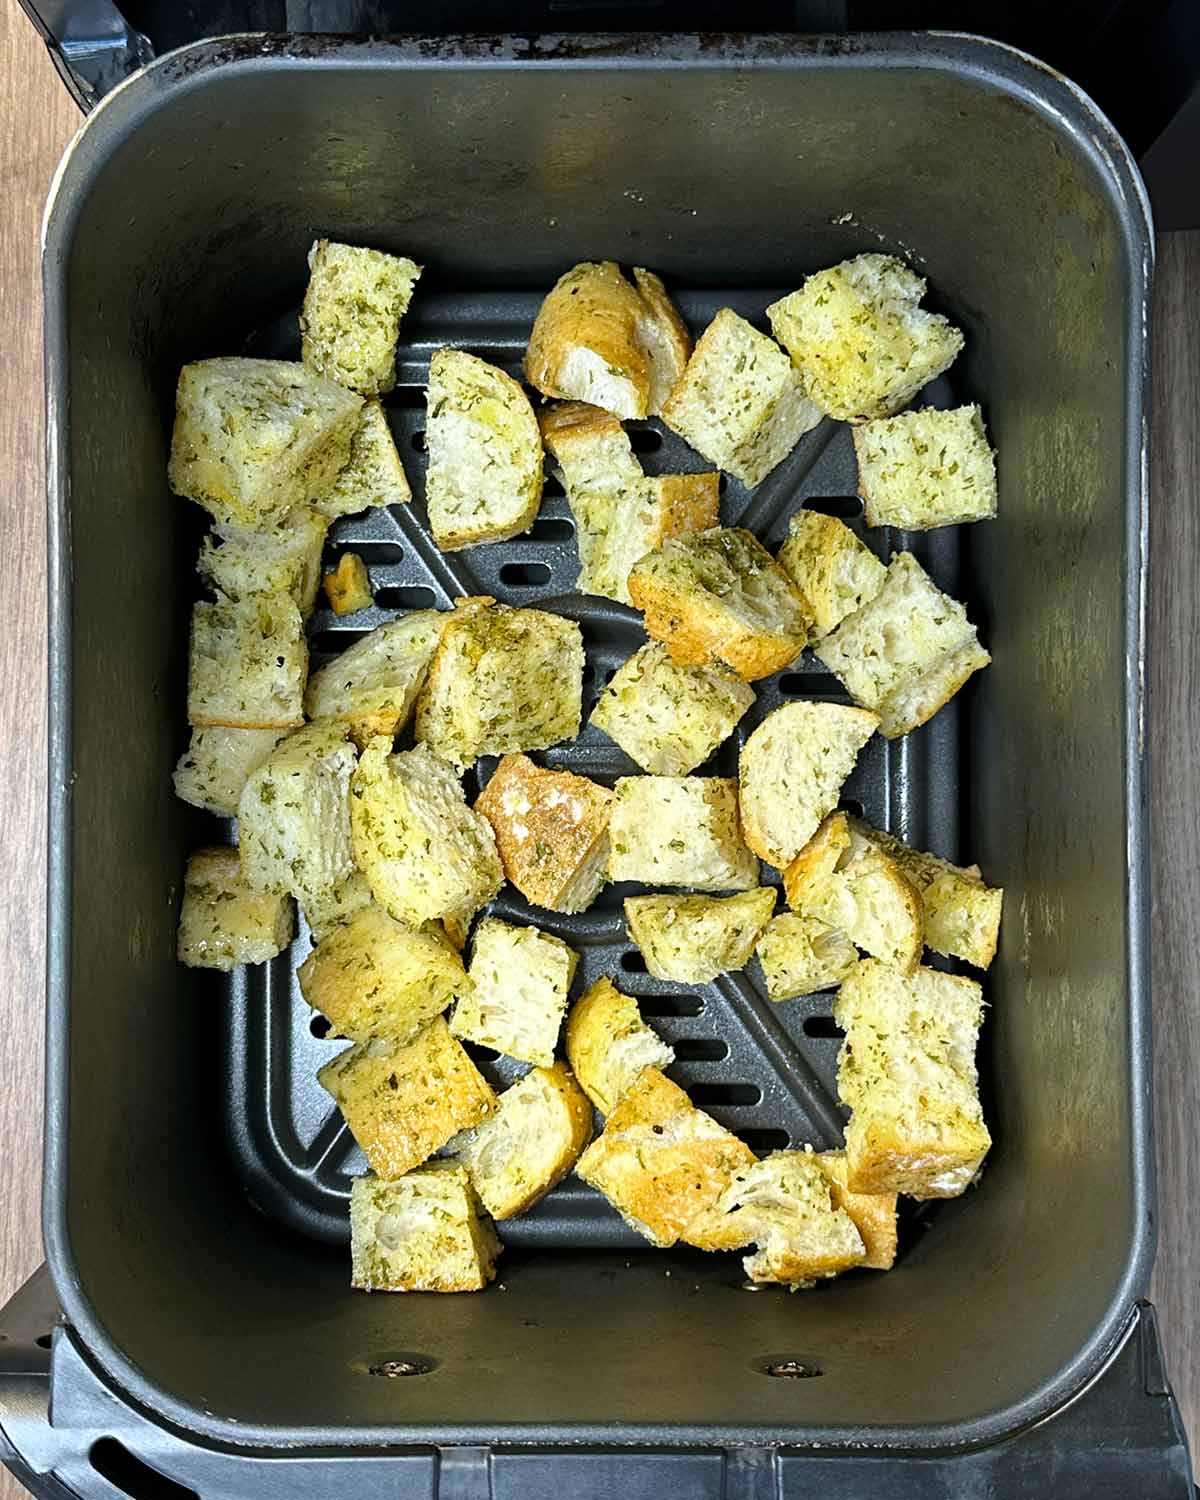 Coated chunks of bread in an air fryer basket.